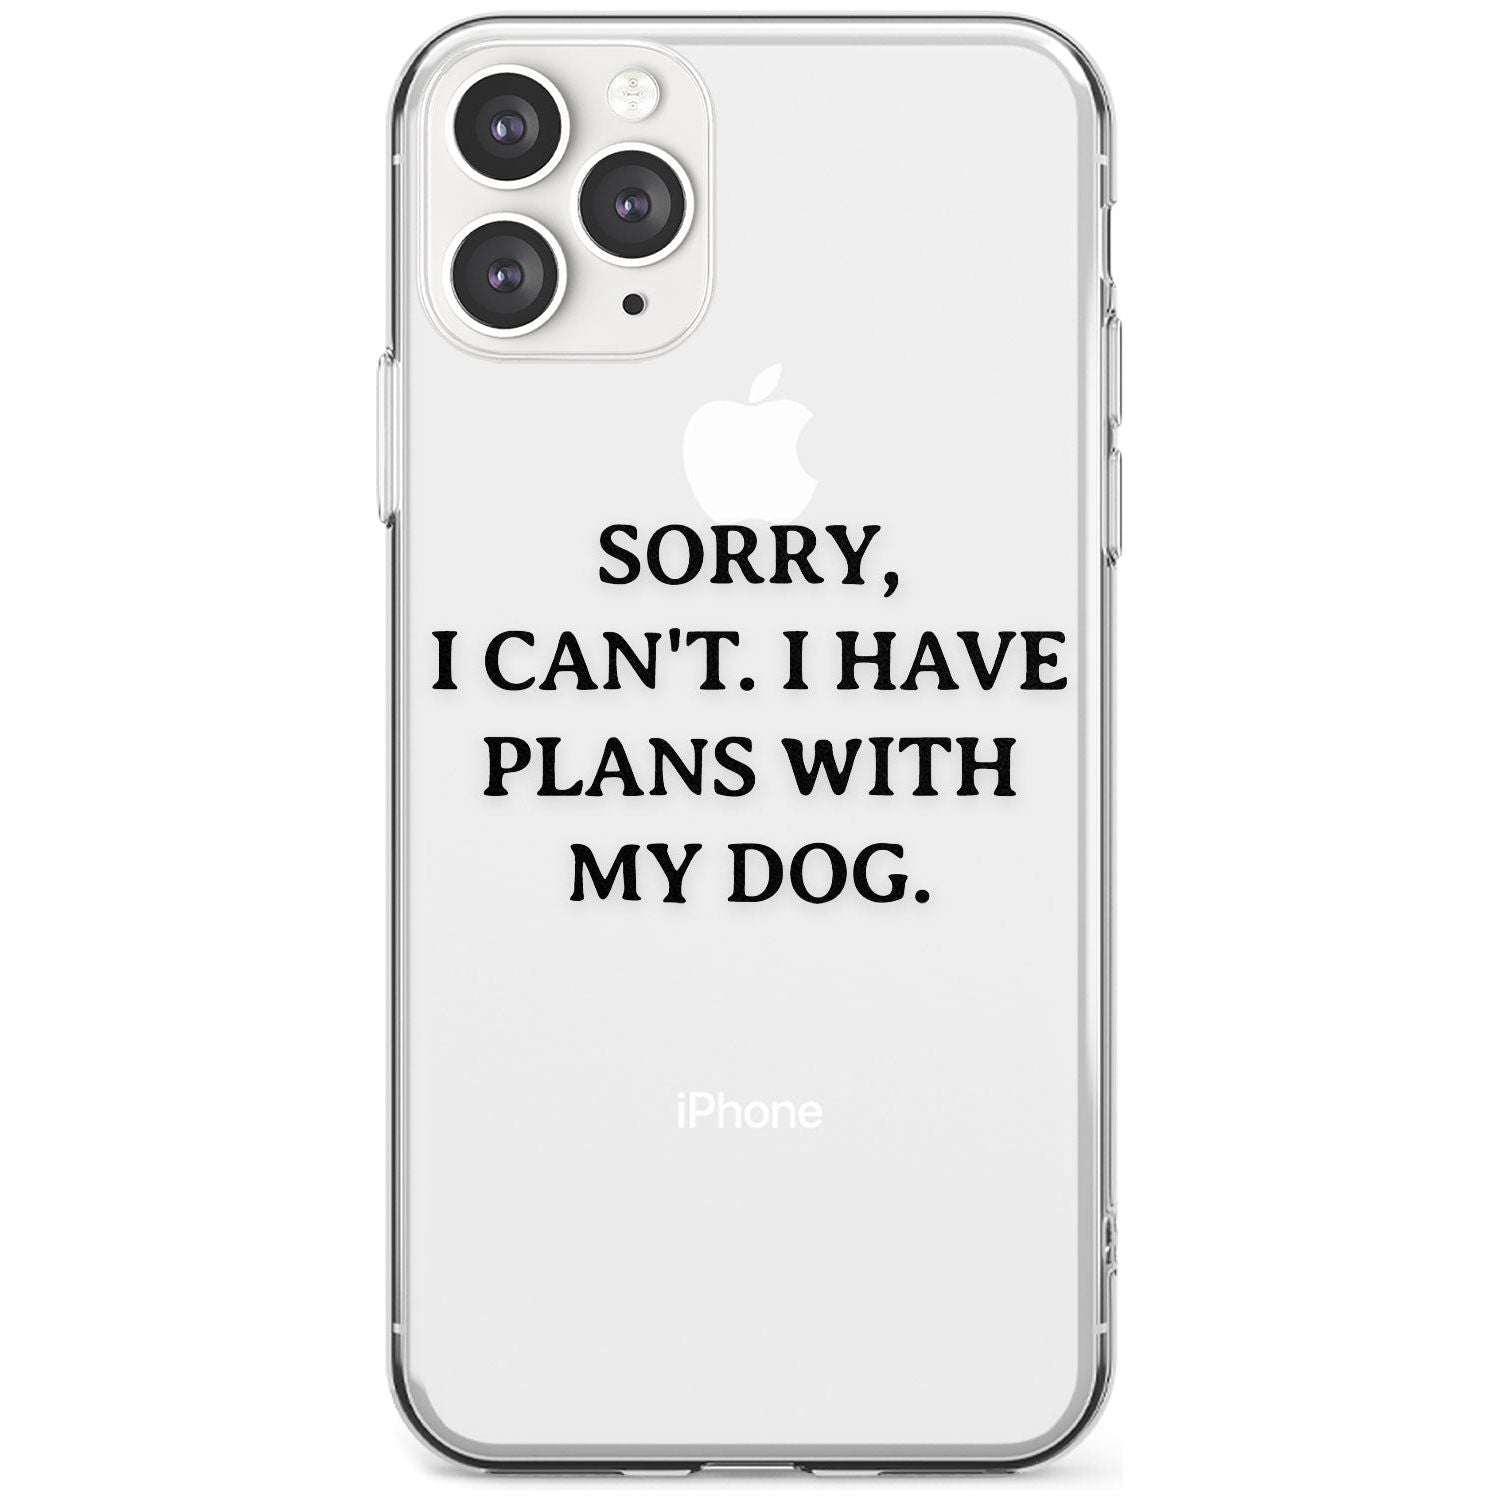 Plans with Dog Slim TPU Phone Case for iPhone 11 Pro Max